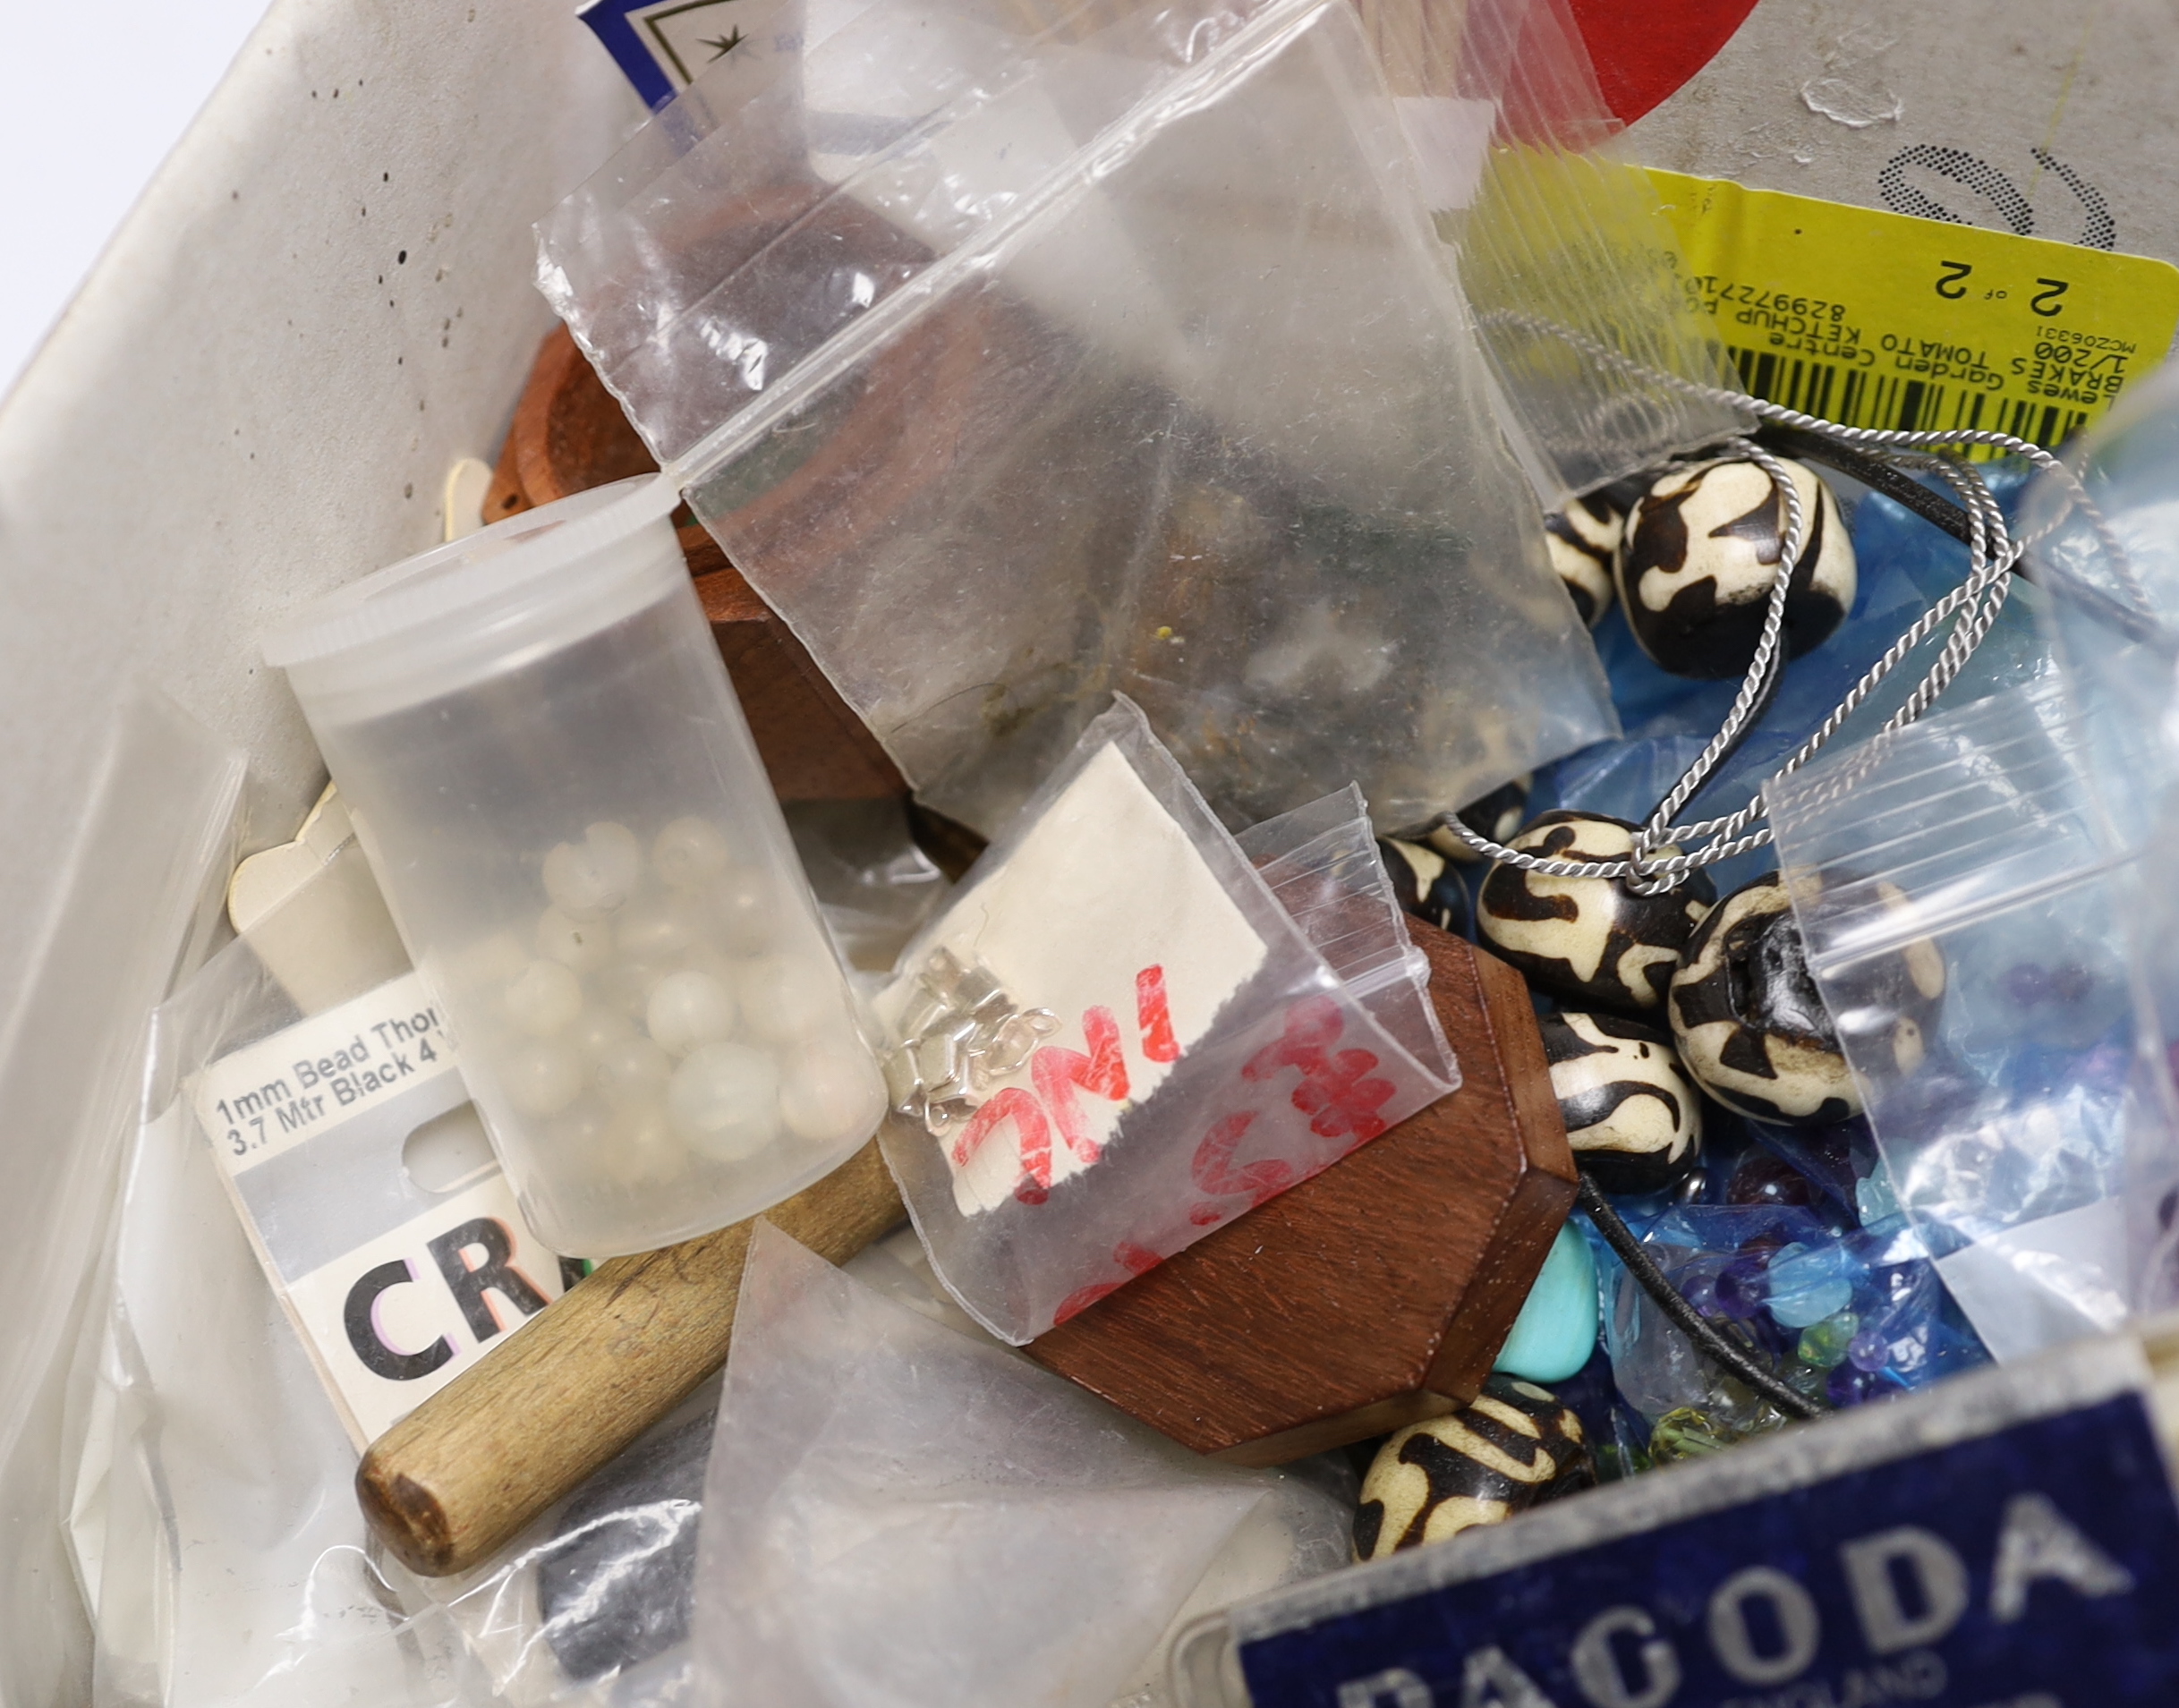 A quantity of assorted jewellery related items including loose beads, bolt rings, thread, copper wire, agate stones, etc.